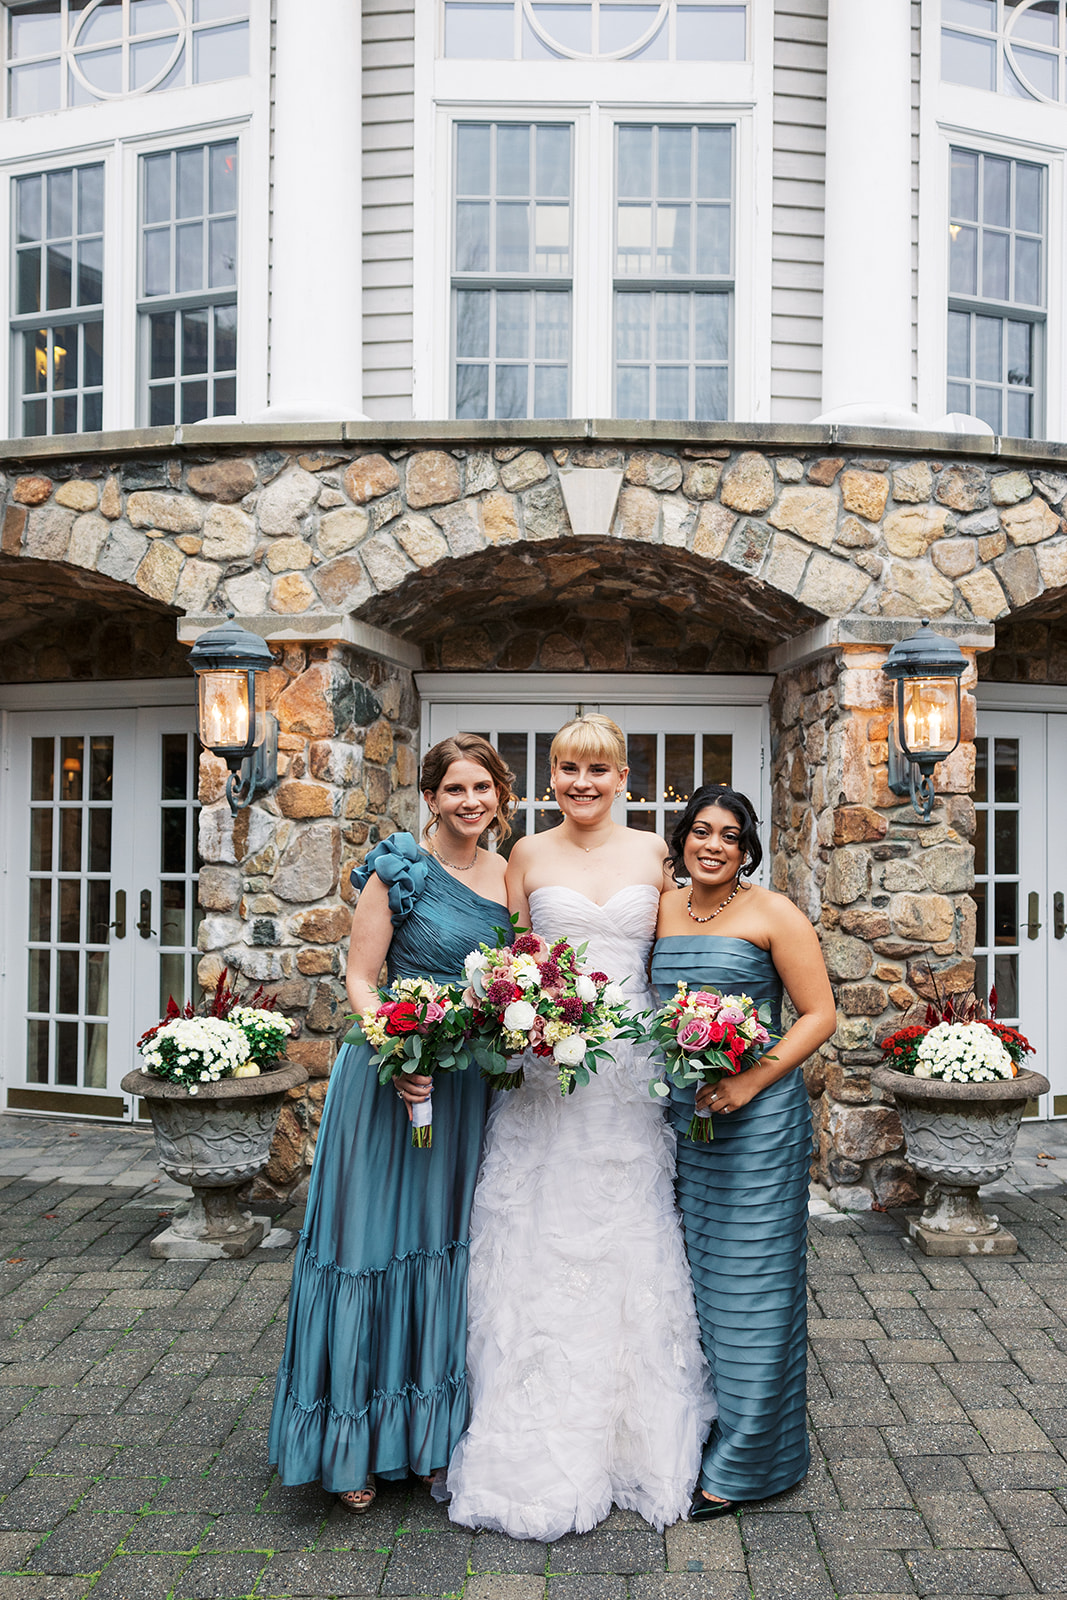 A bride stands with her bridesmaids outside the Olde Mill Inn Wedding venue